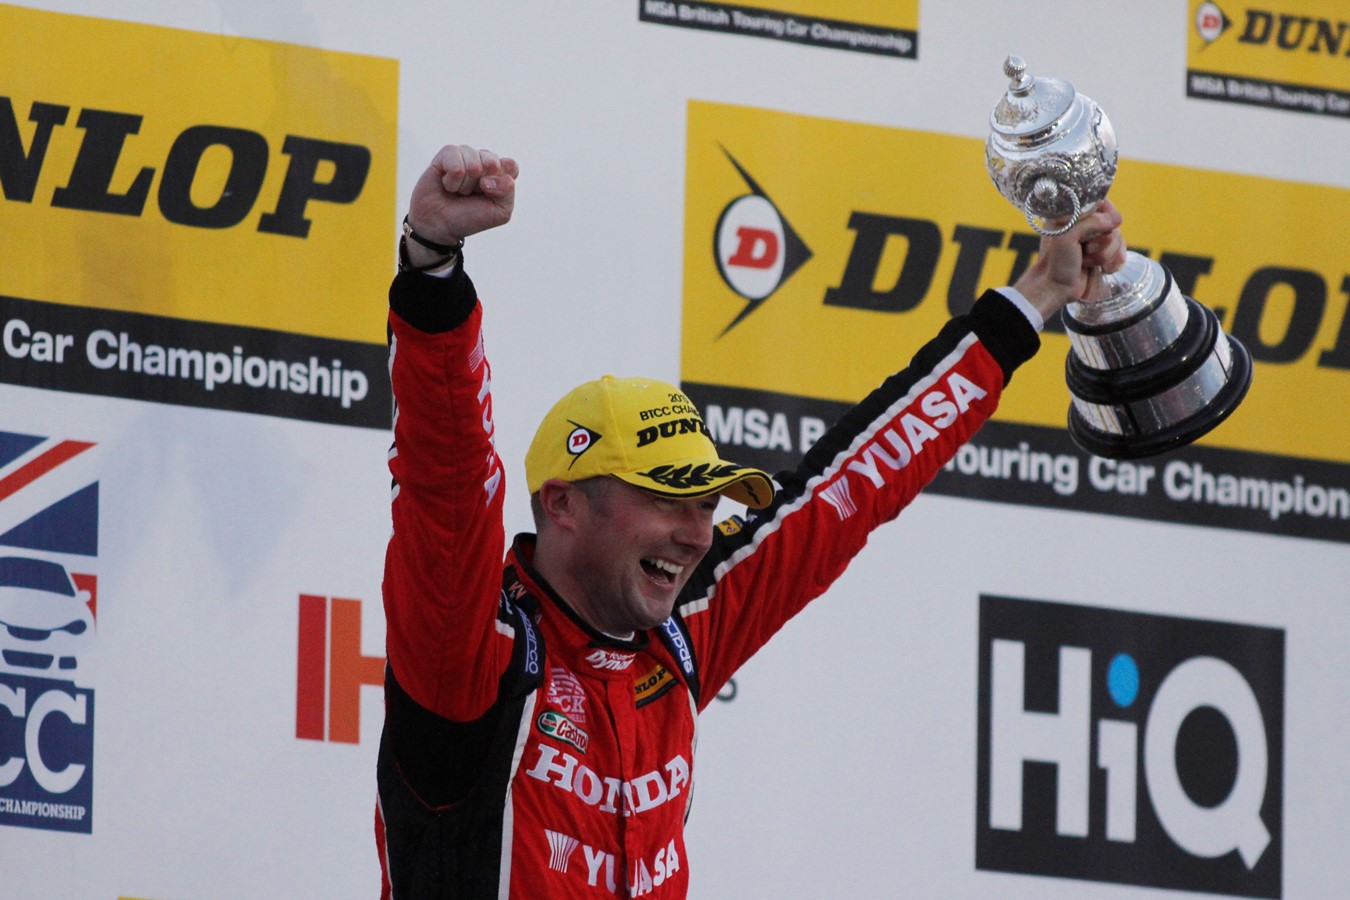 Champion's drive secures Shedden and Honda BTCC title glory